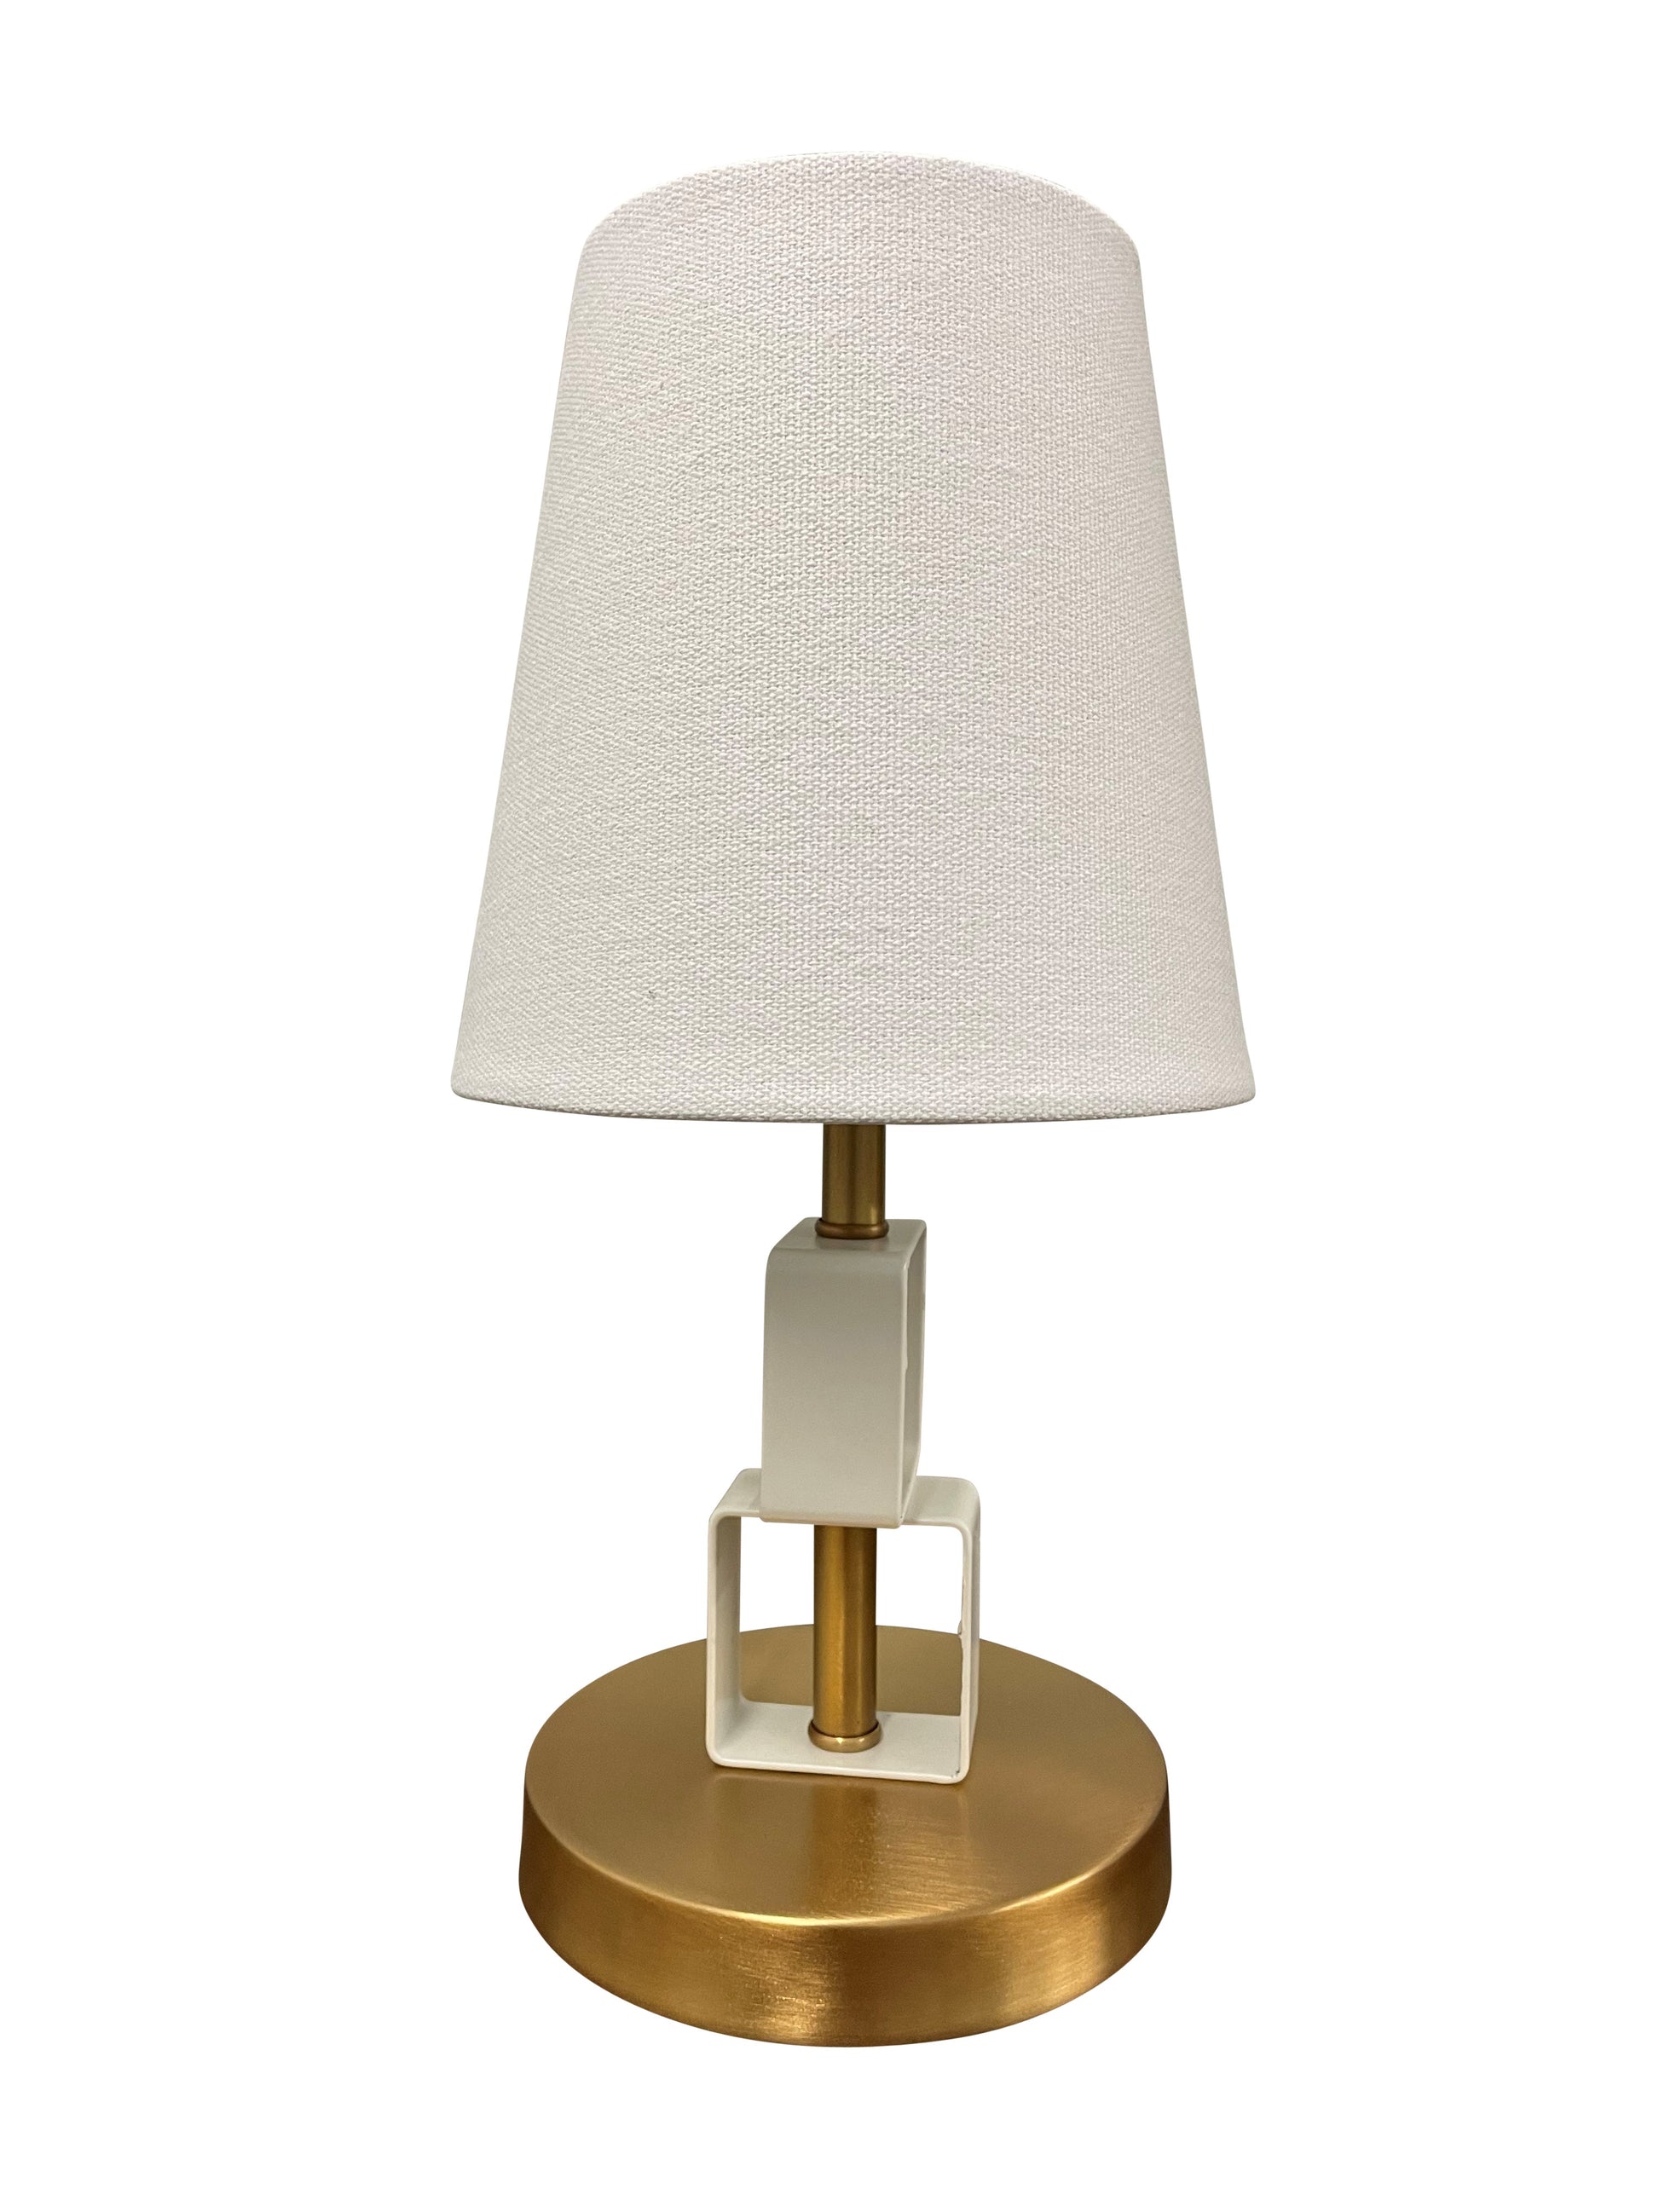 House of Troy Bryson Mini weathered brass and white accent lamp B208-WB/WT